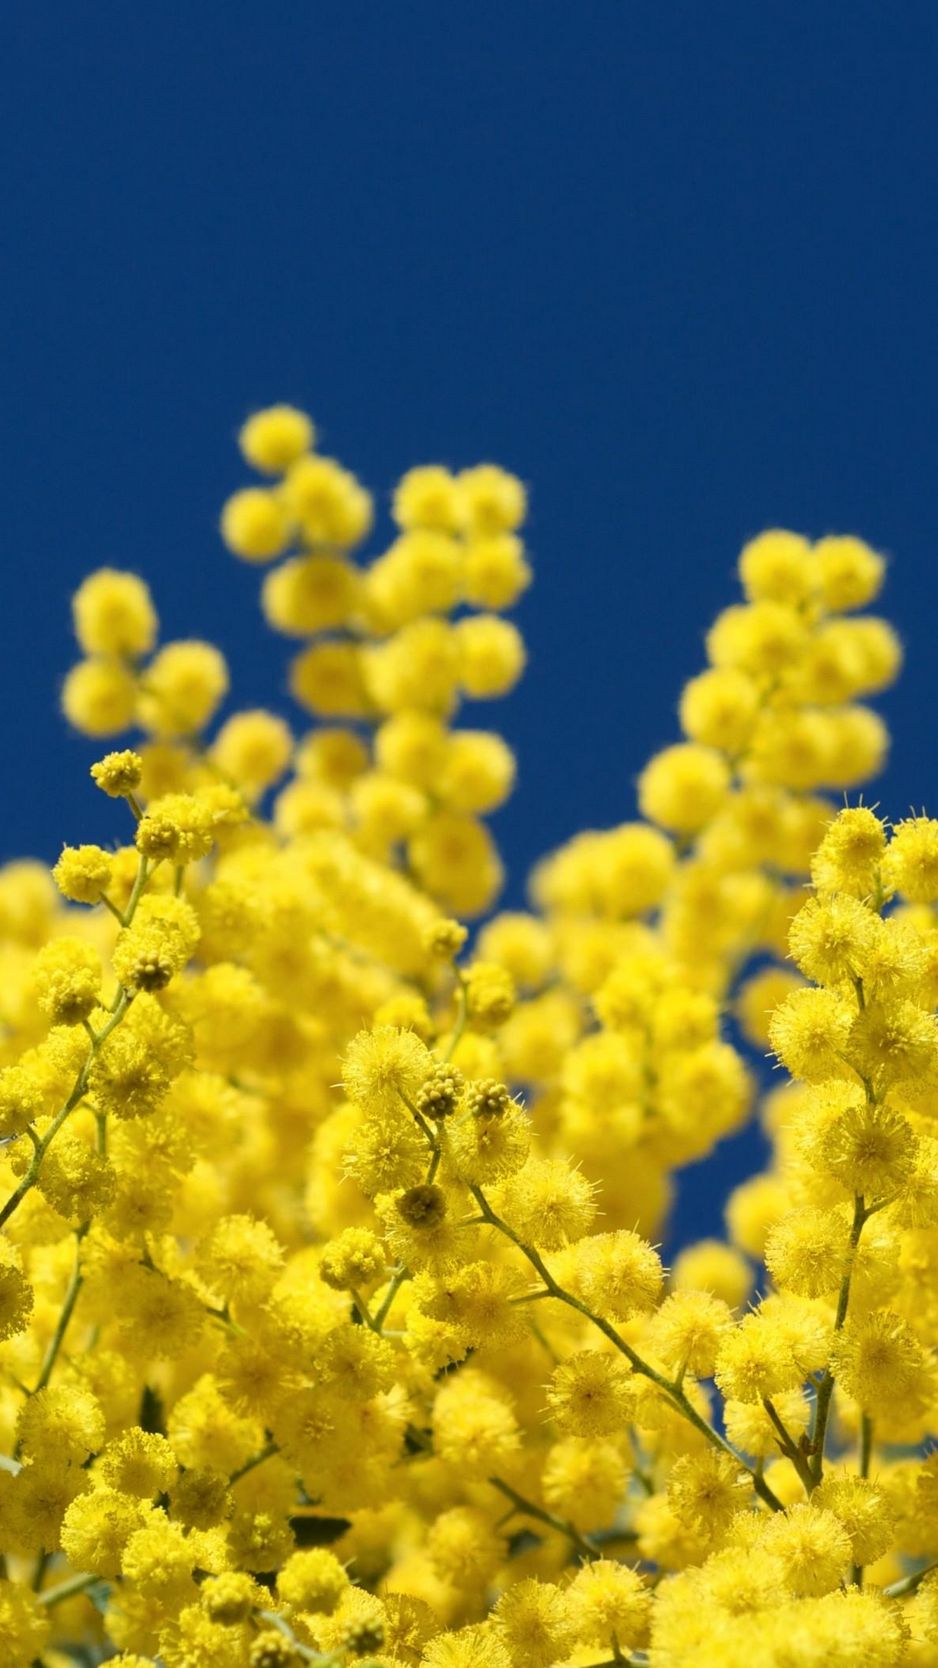 Download Wallpaper 938x1668 Mimosa Twigs Yellow Fluffy Close Up Sky Iphone 8 7 6s 6 For Parallax Hd Background